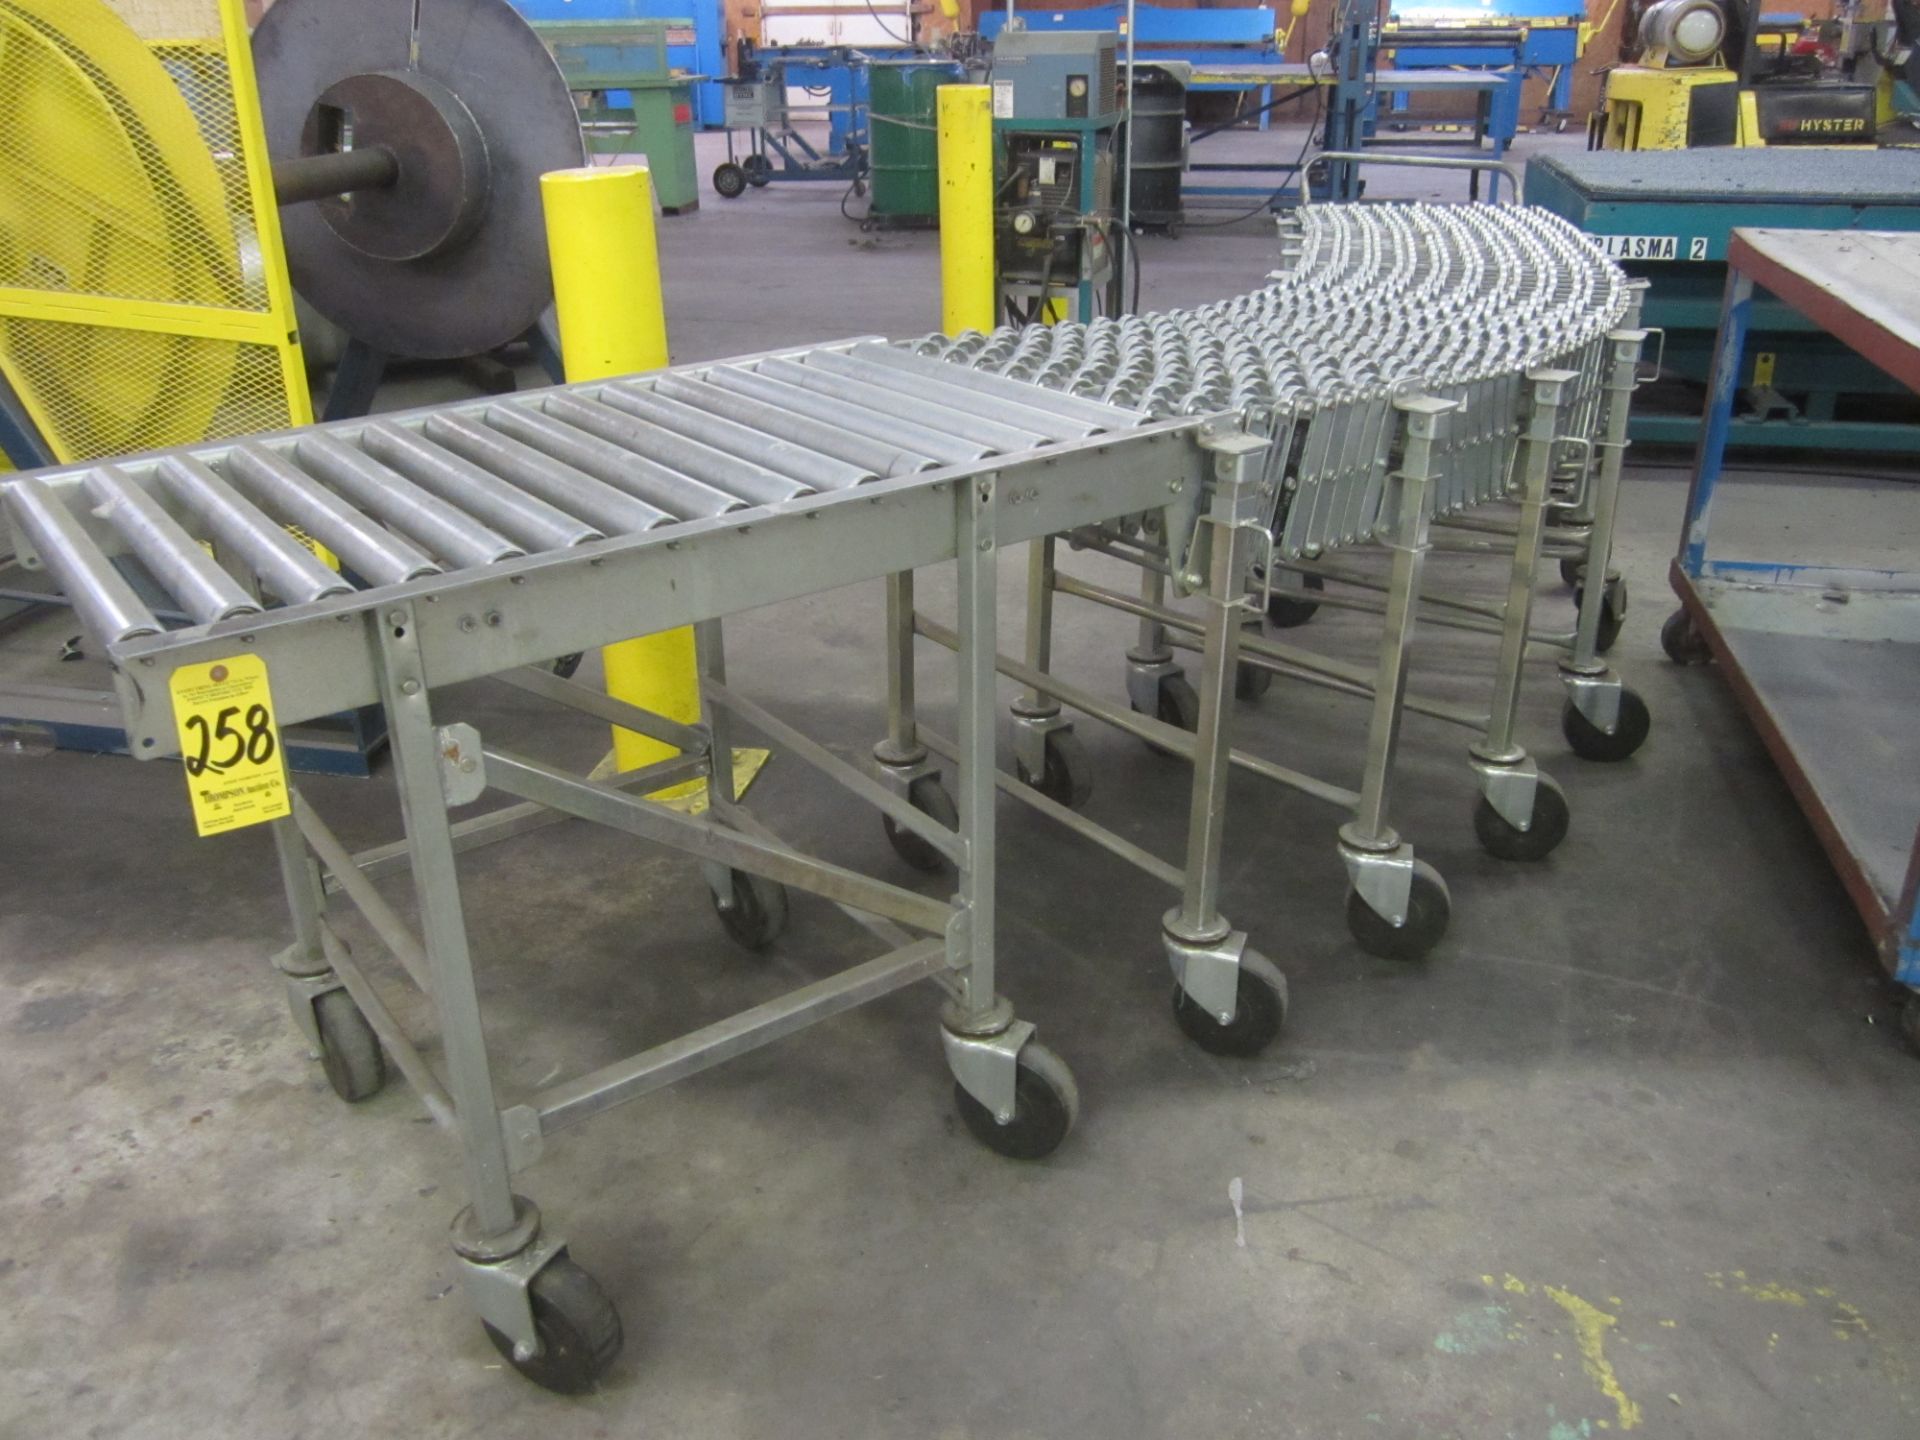 Flexible Material Handling "Nestaflex 376" Expandable Roller Conveyor, 24 In. Wide, Expands to